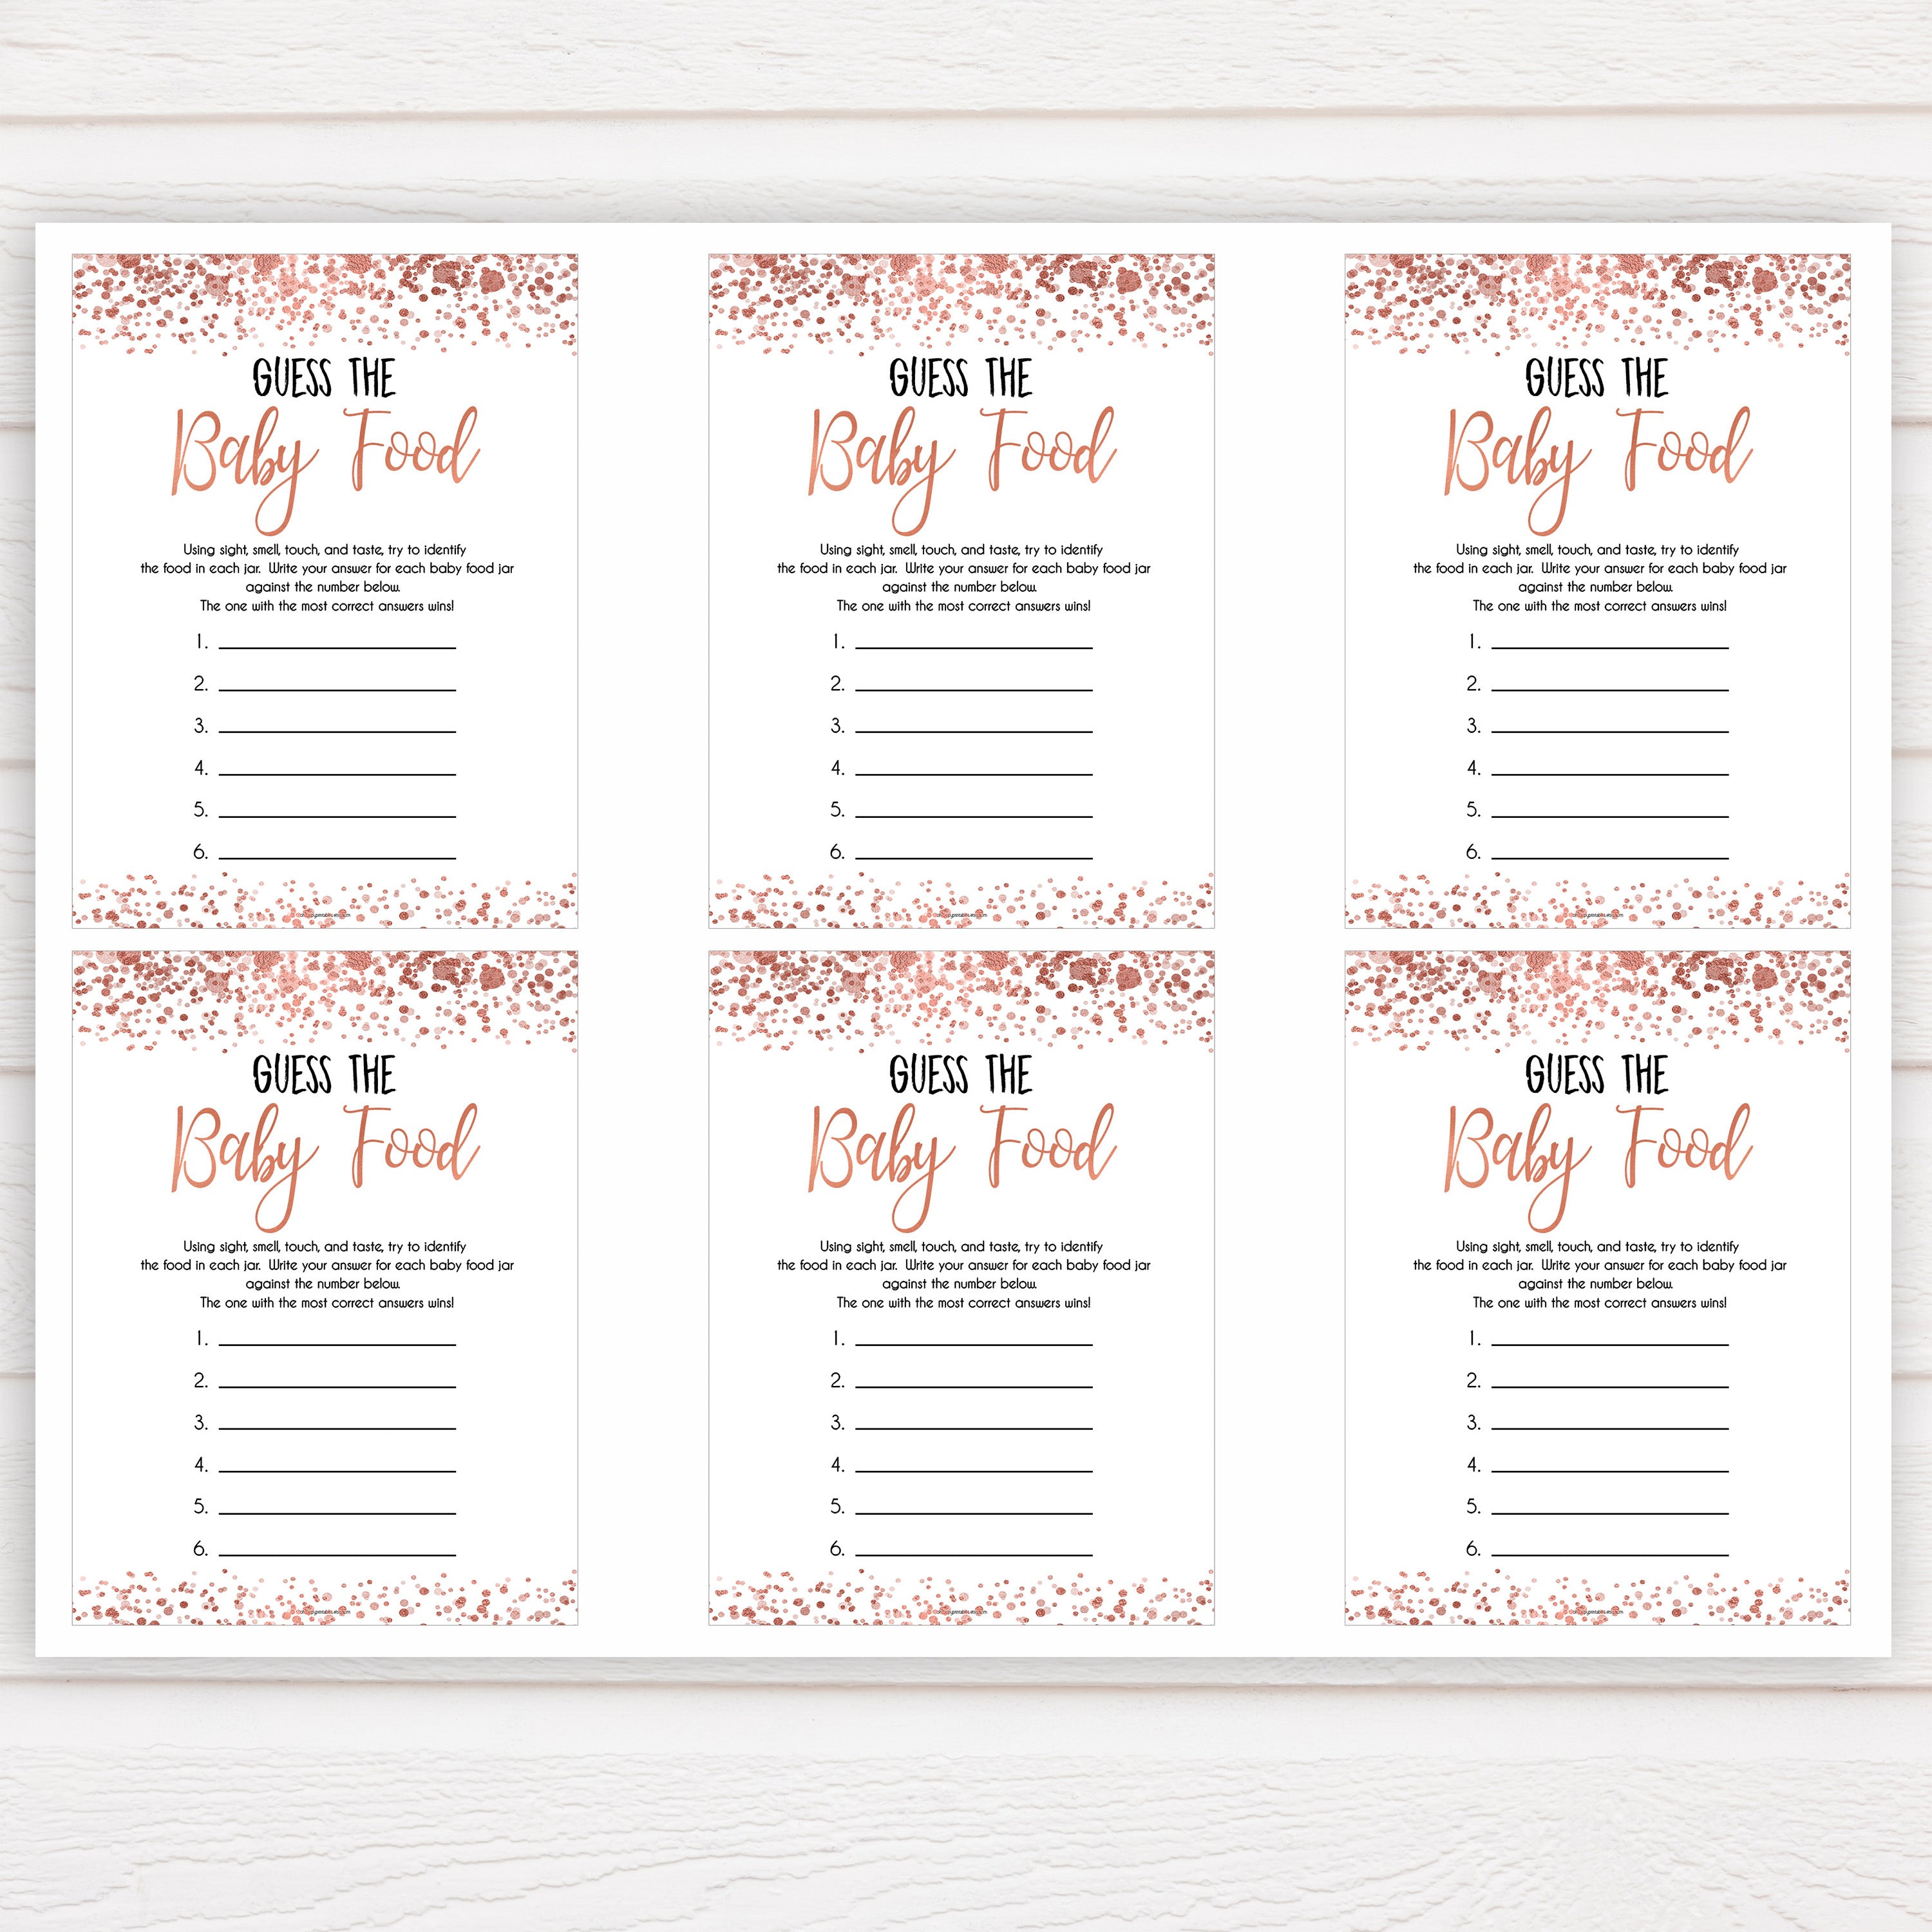 rose gold baby guess the baby food game, printable baby shower games, fun baby games, rose gold baby games, popular baby games